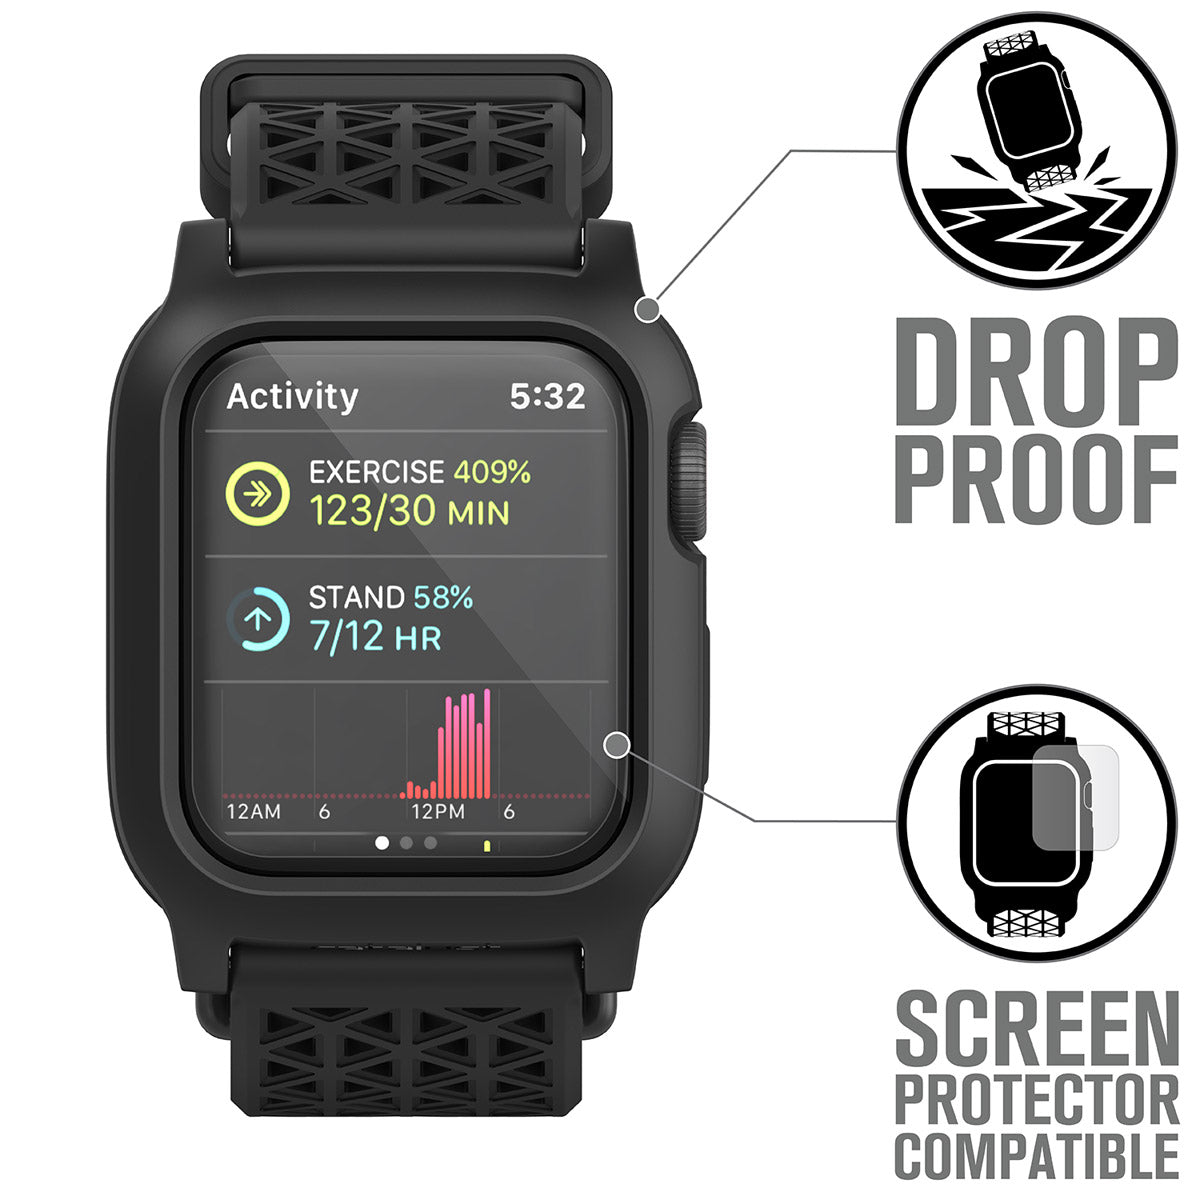 catalyst apple watch series 6 5 4 se gen 21 44mm 40mm impact protection case sport band stealth black showing drop proof and screen protector comaptibility text reads drop proof screen protector compatible